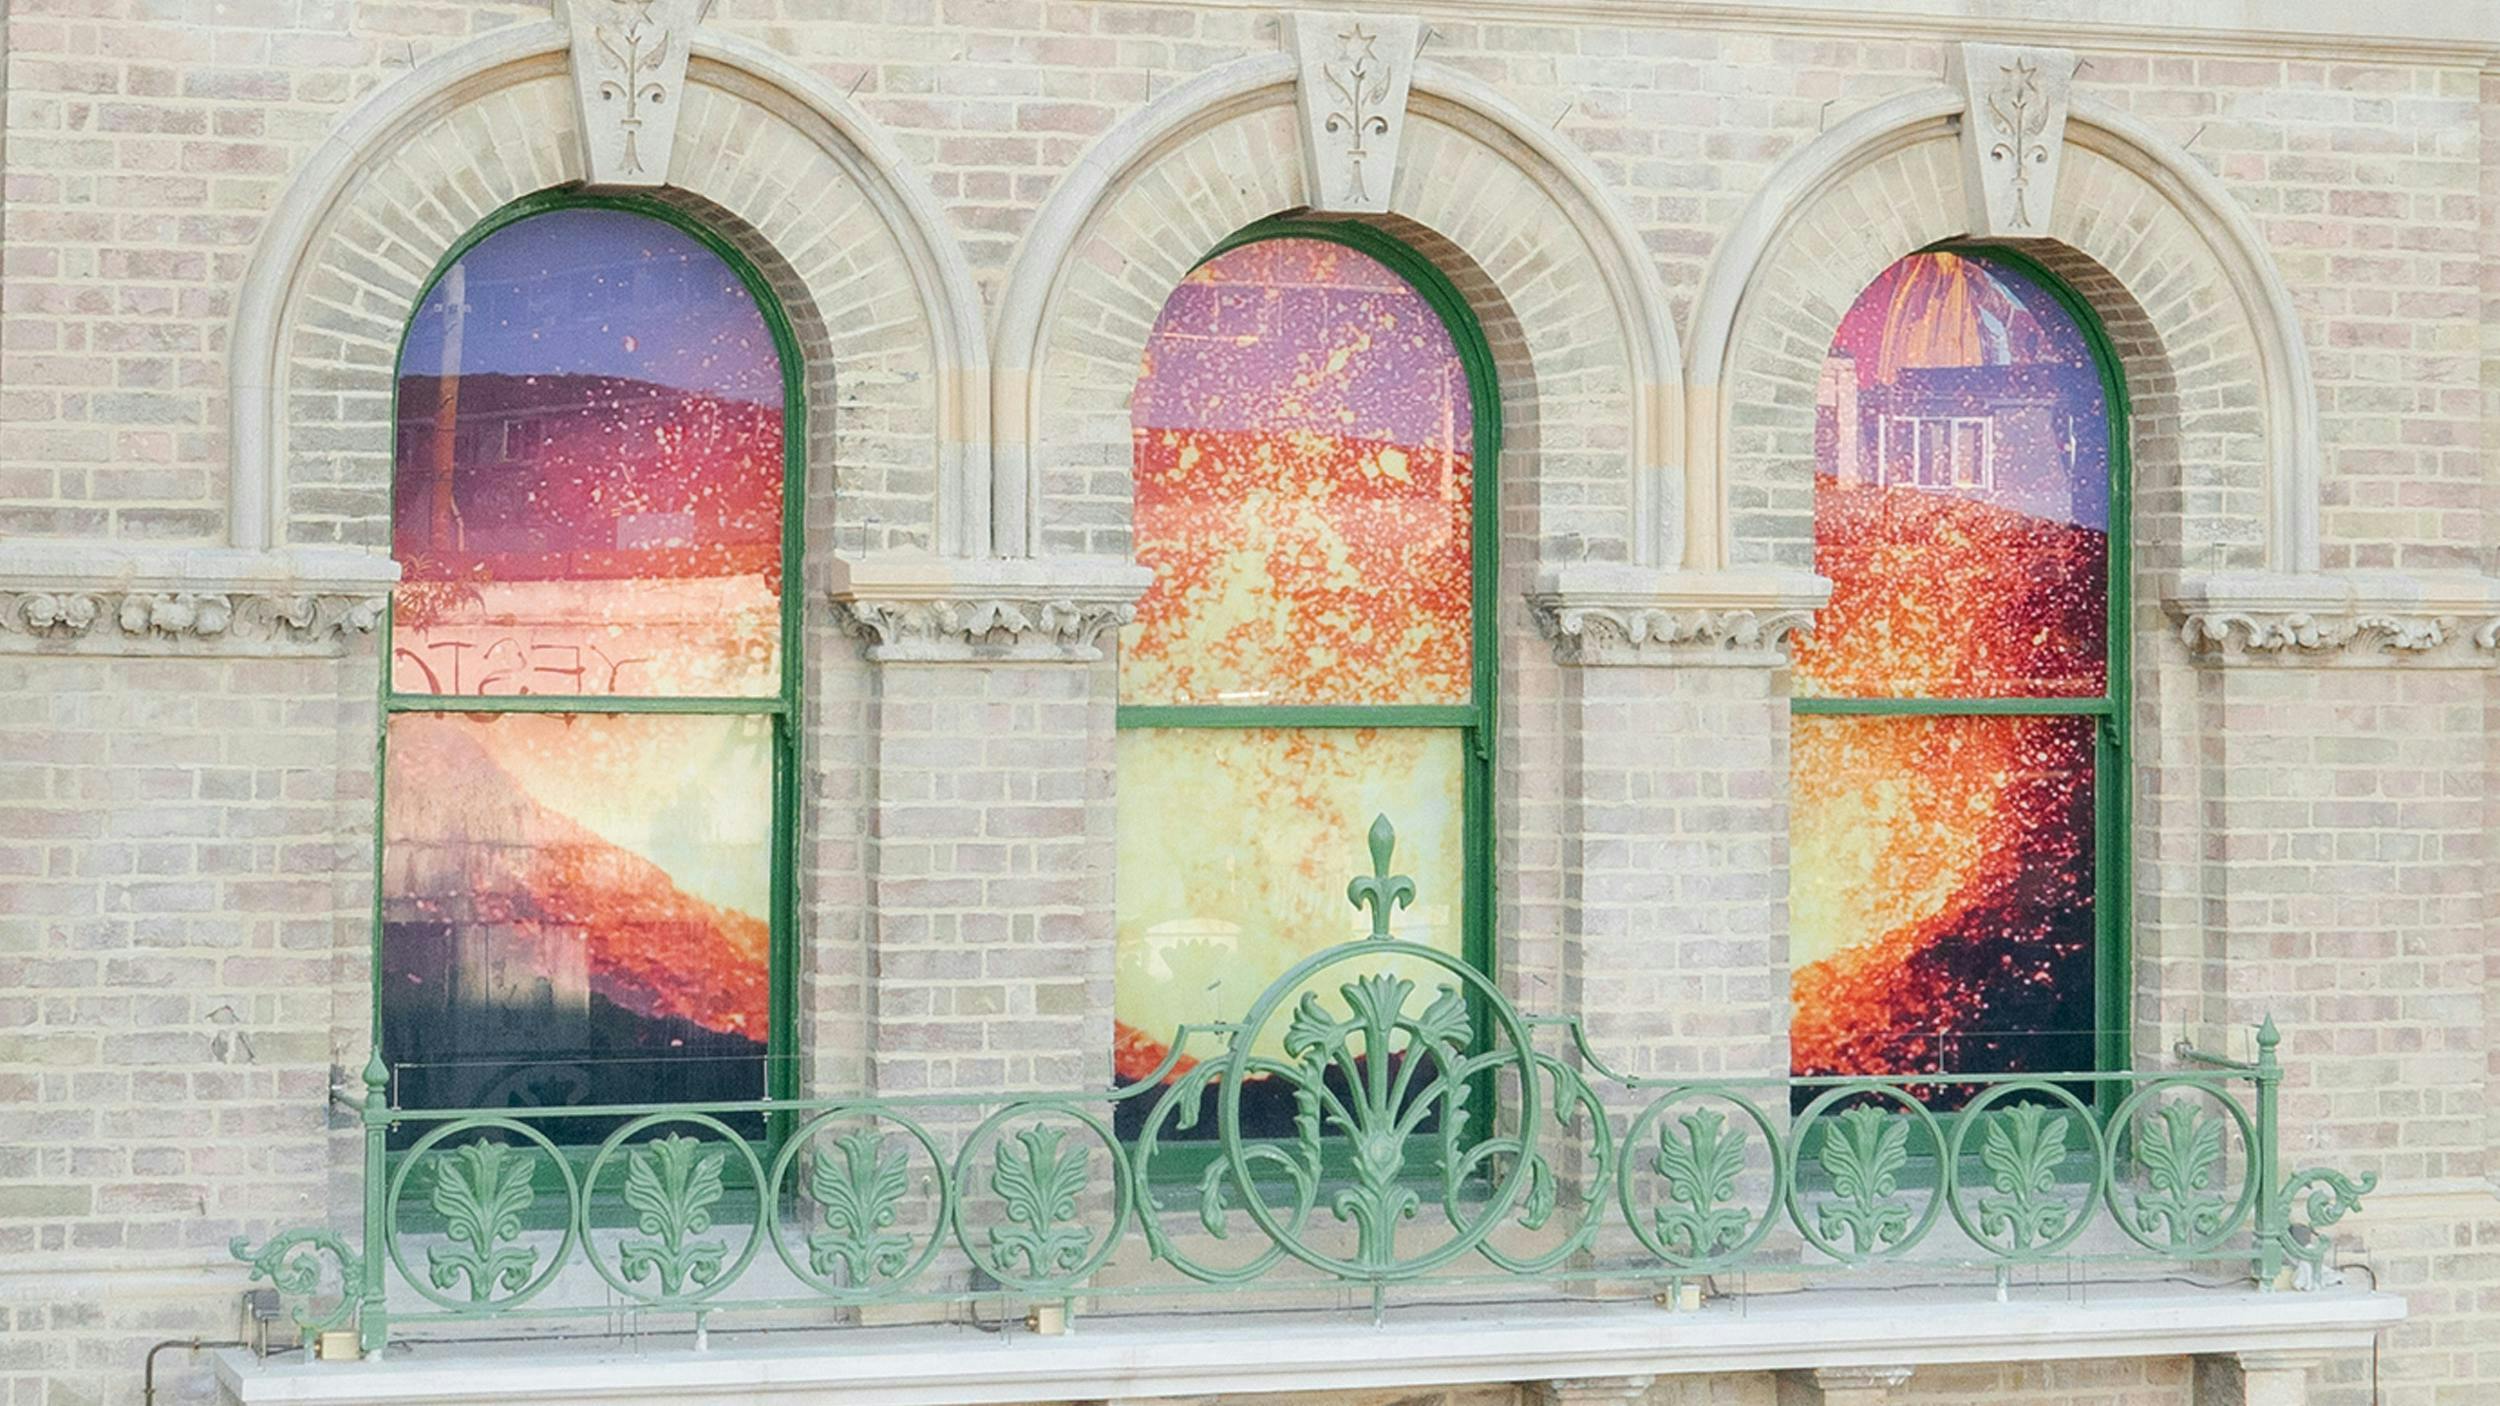 Exterior of old brick building with arched windows, with a vinyl image of a volcano in the windows